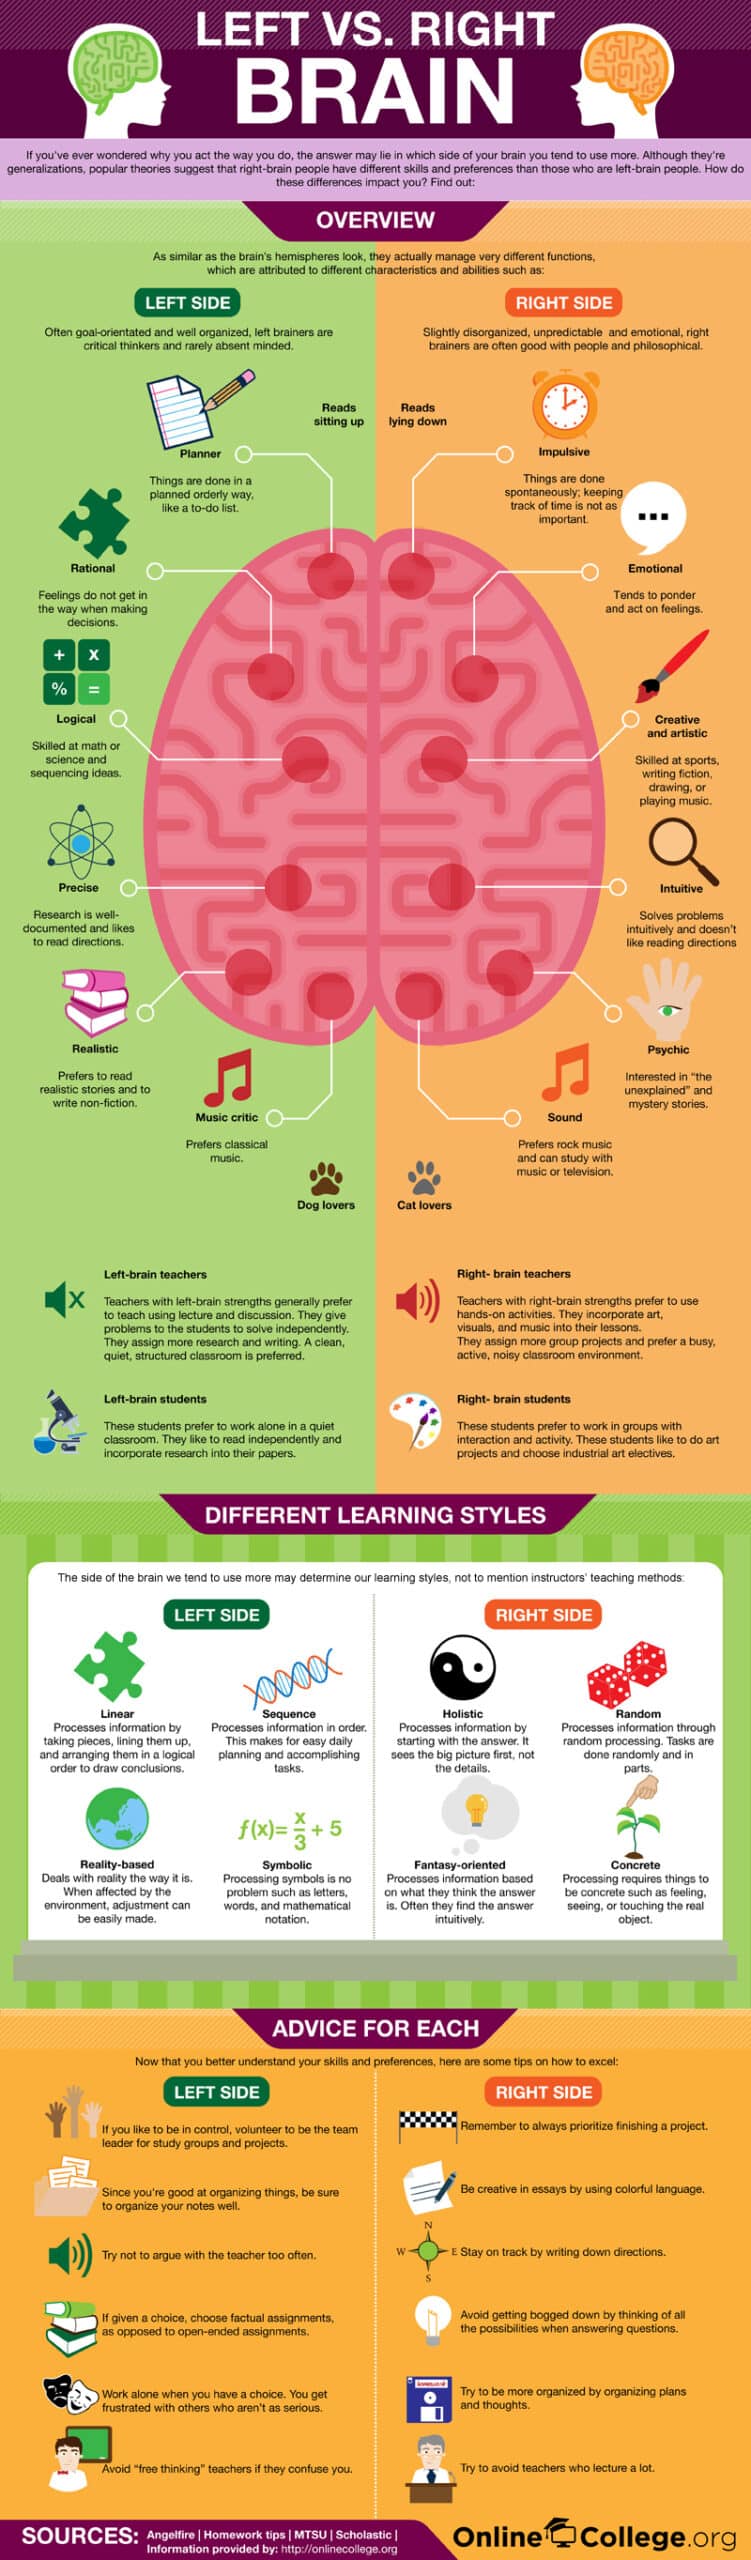 Left versus Right Brain and Learning